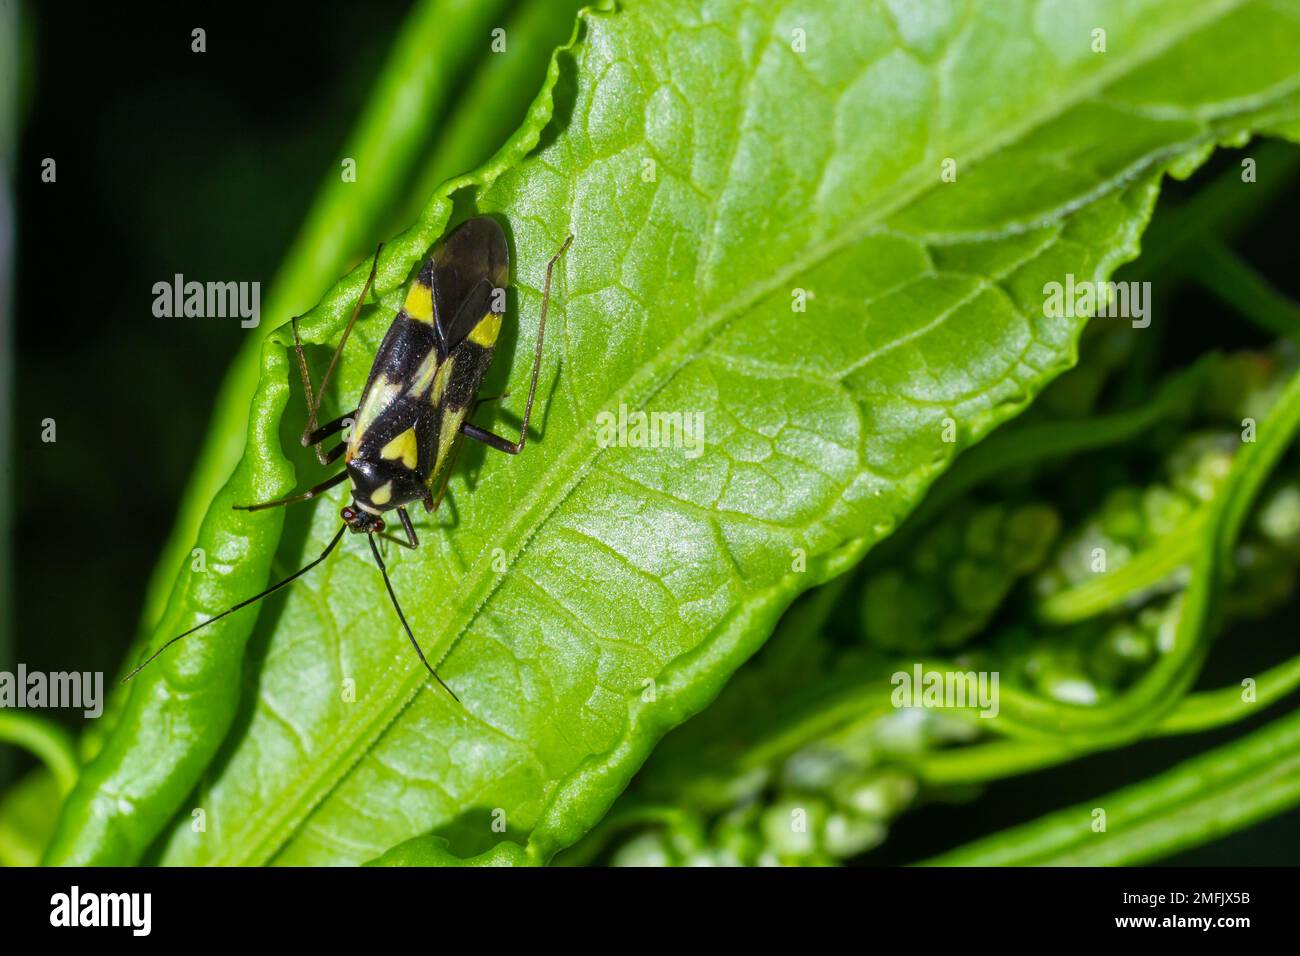 Bug form the family Miridae on plant leaf. In the forest on a summer day. Stock Photo